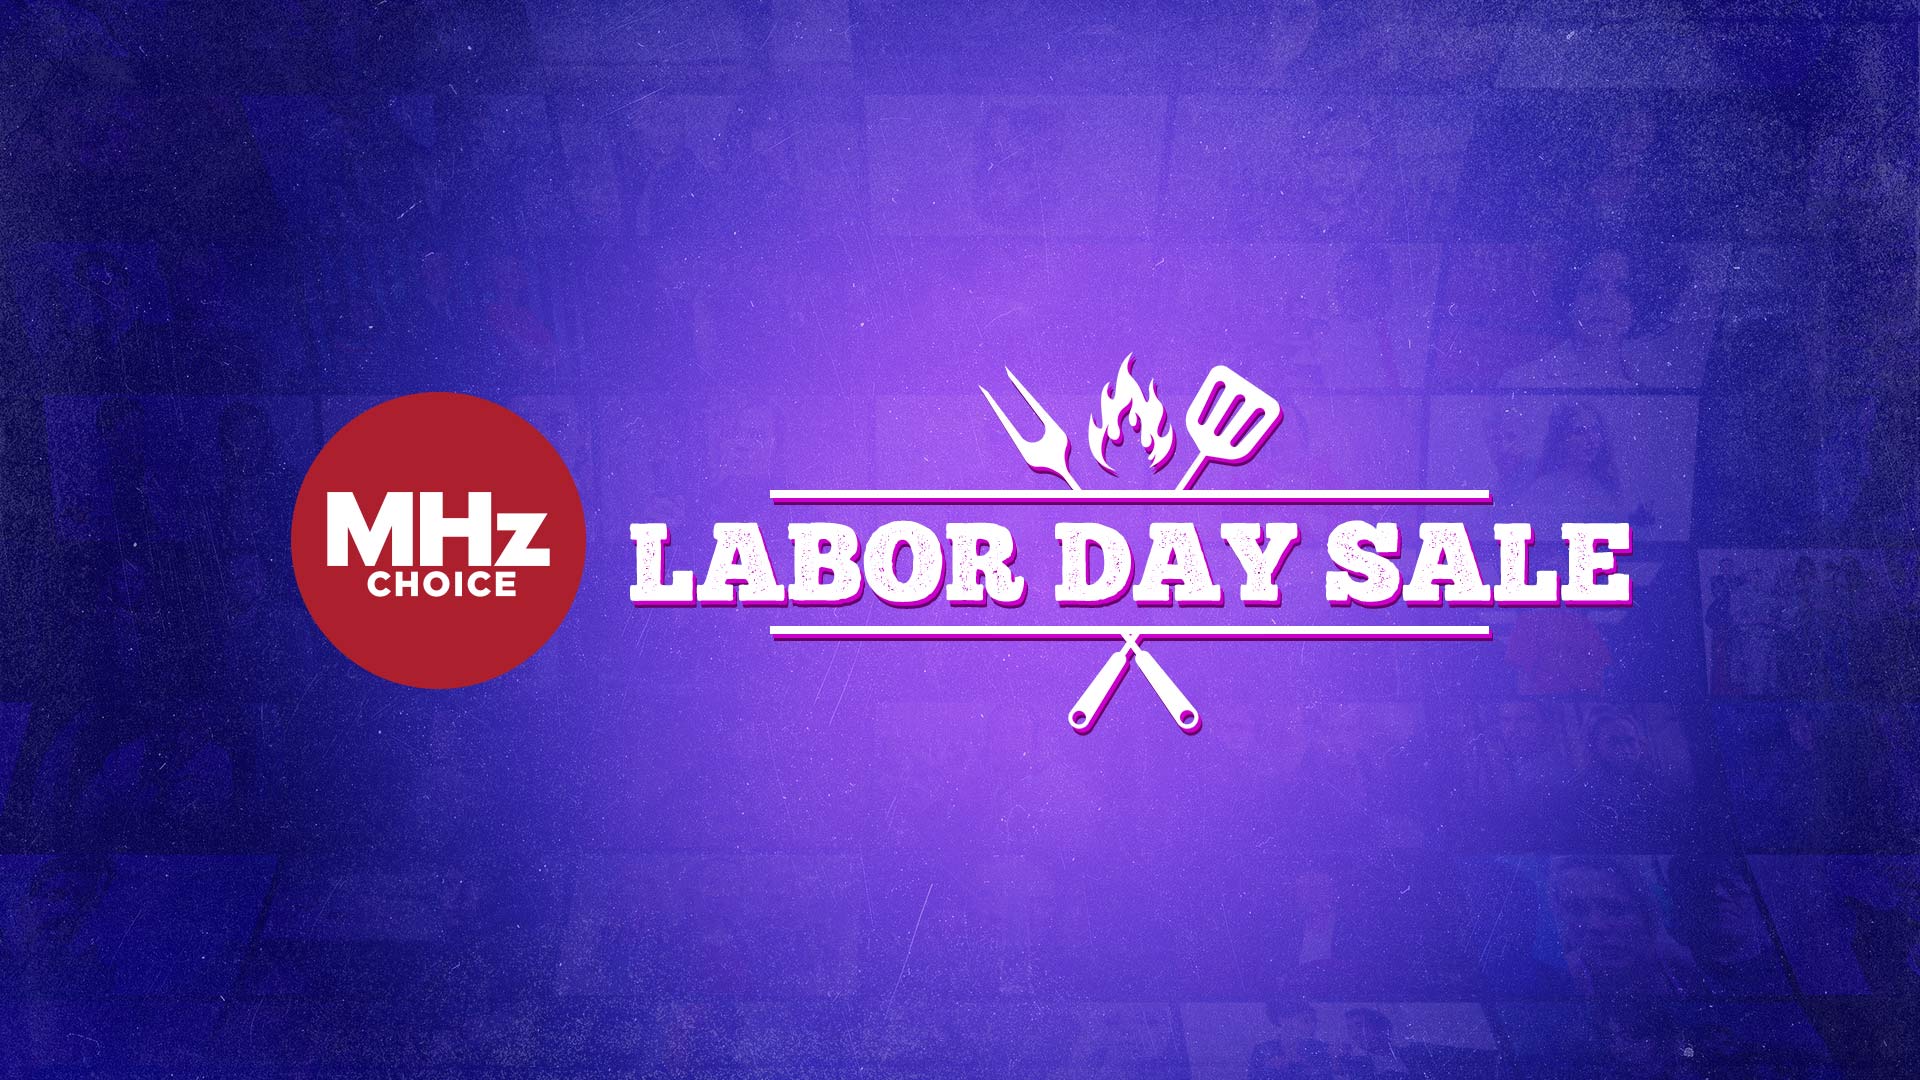 Labor Day Sale 40 off 1 year! Use code LABOR23